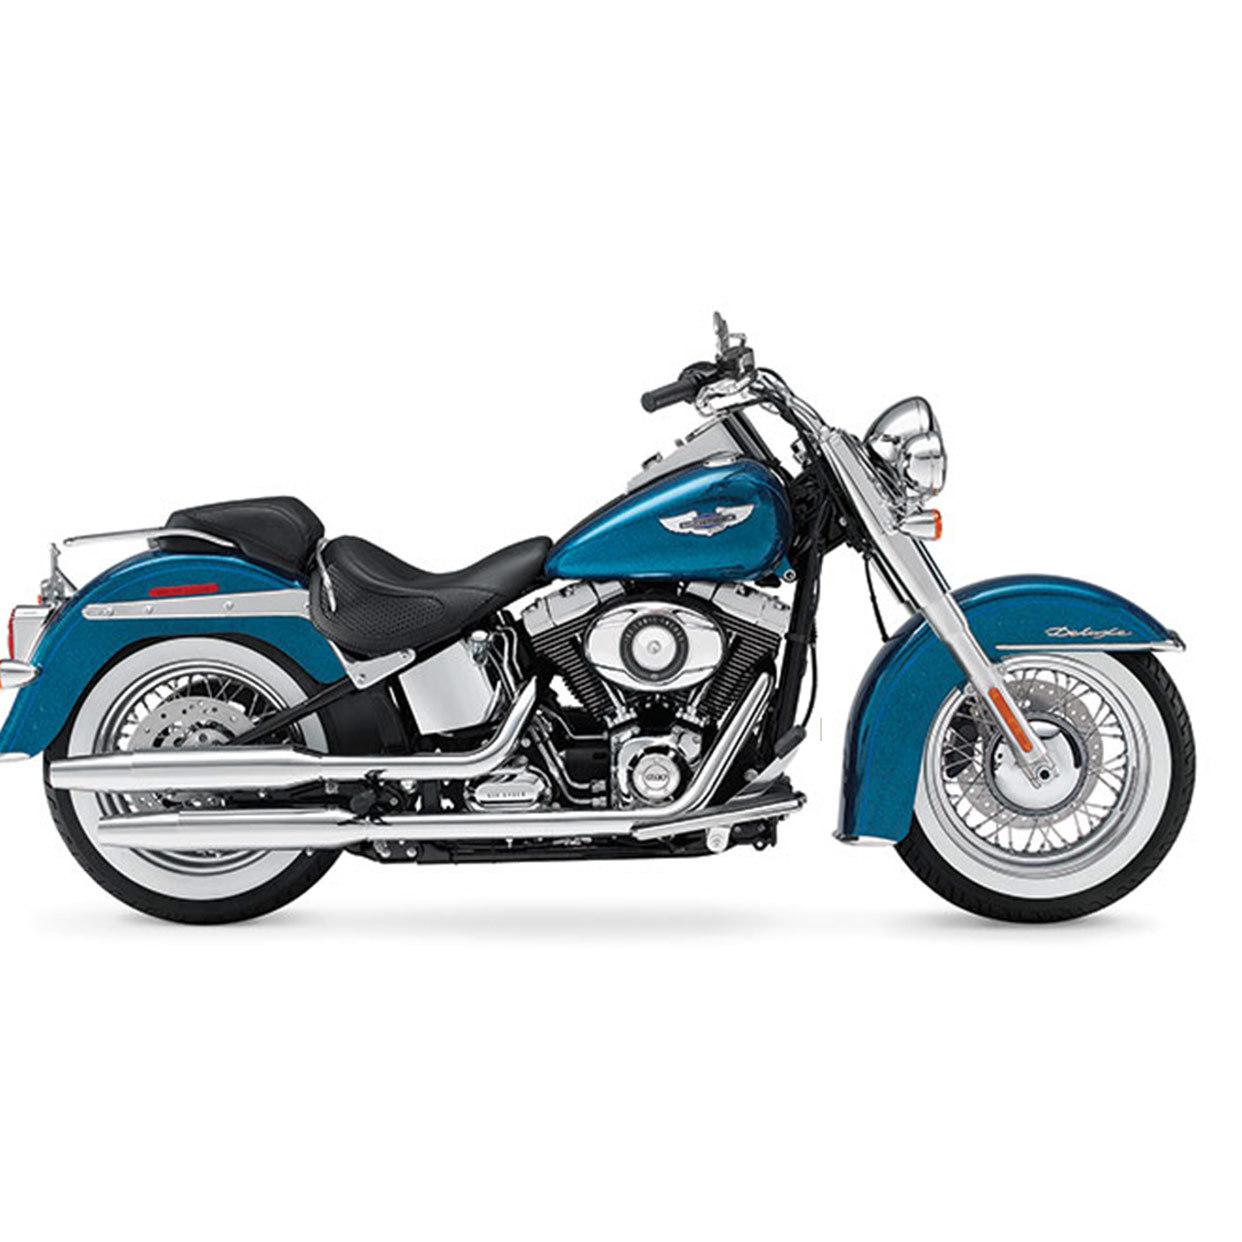  Softail Deluxe